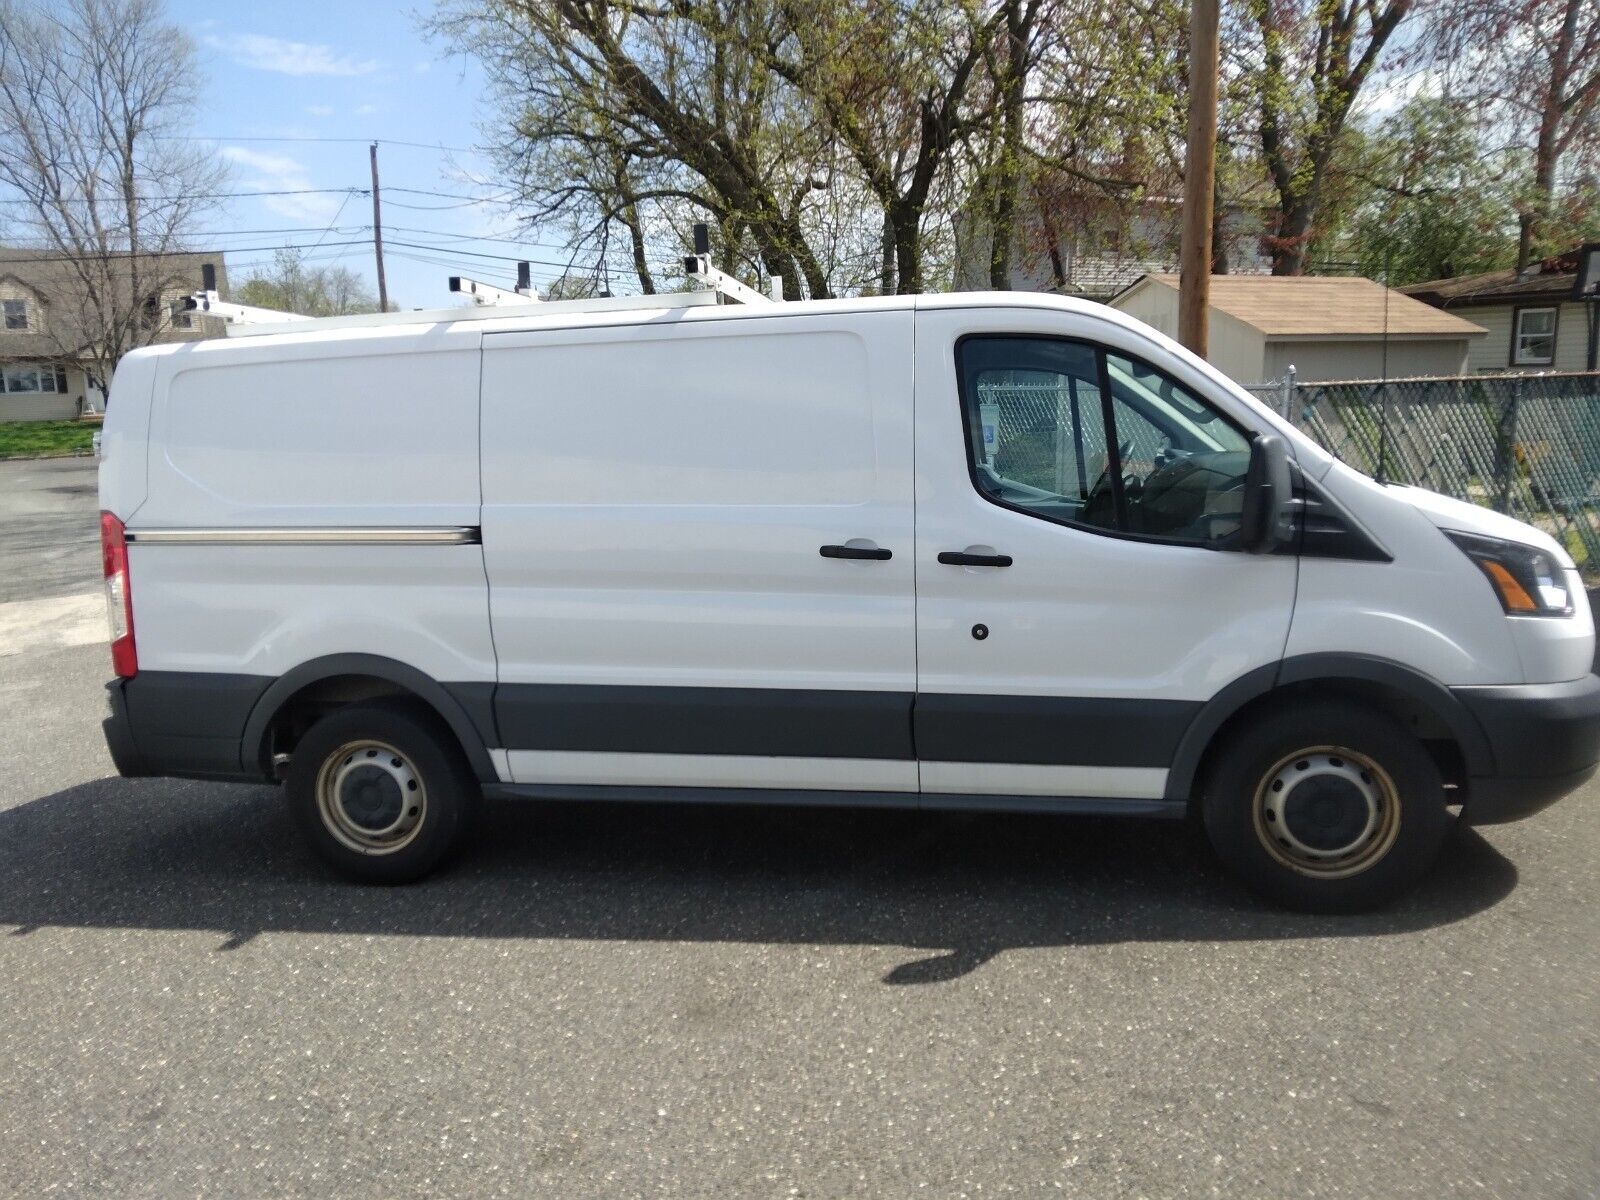 2018 Ford Transit 150 with Shelving & Ladder Rack, One Owner, 78,490 miles, $20k